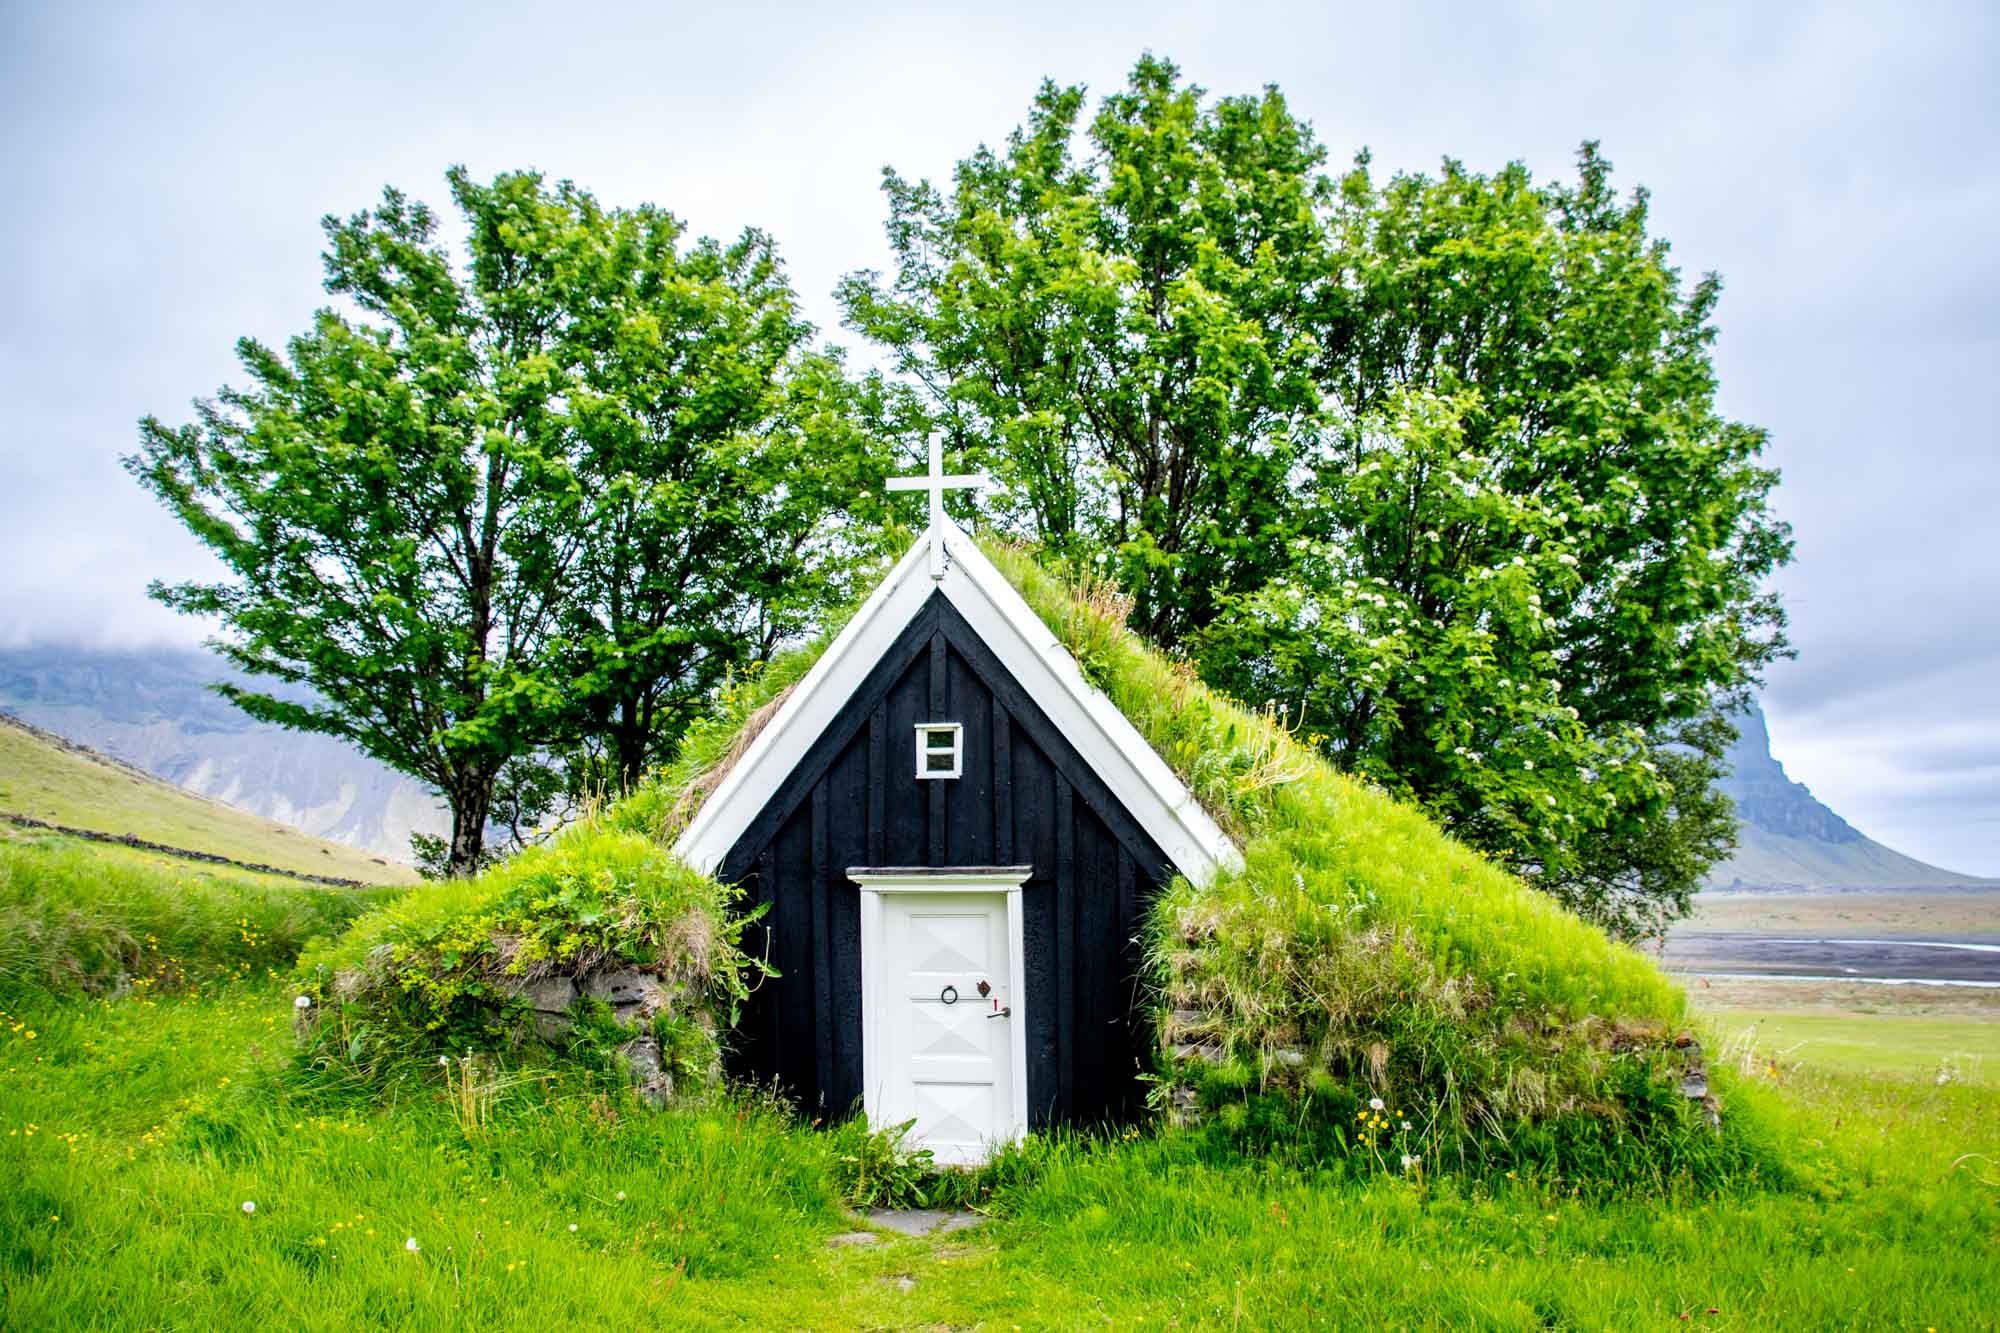 Icelandic turf church surrounded by trees with a mountain in the background